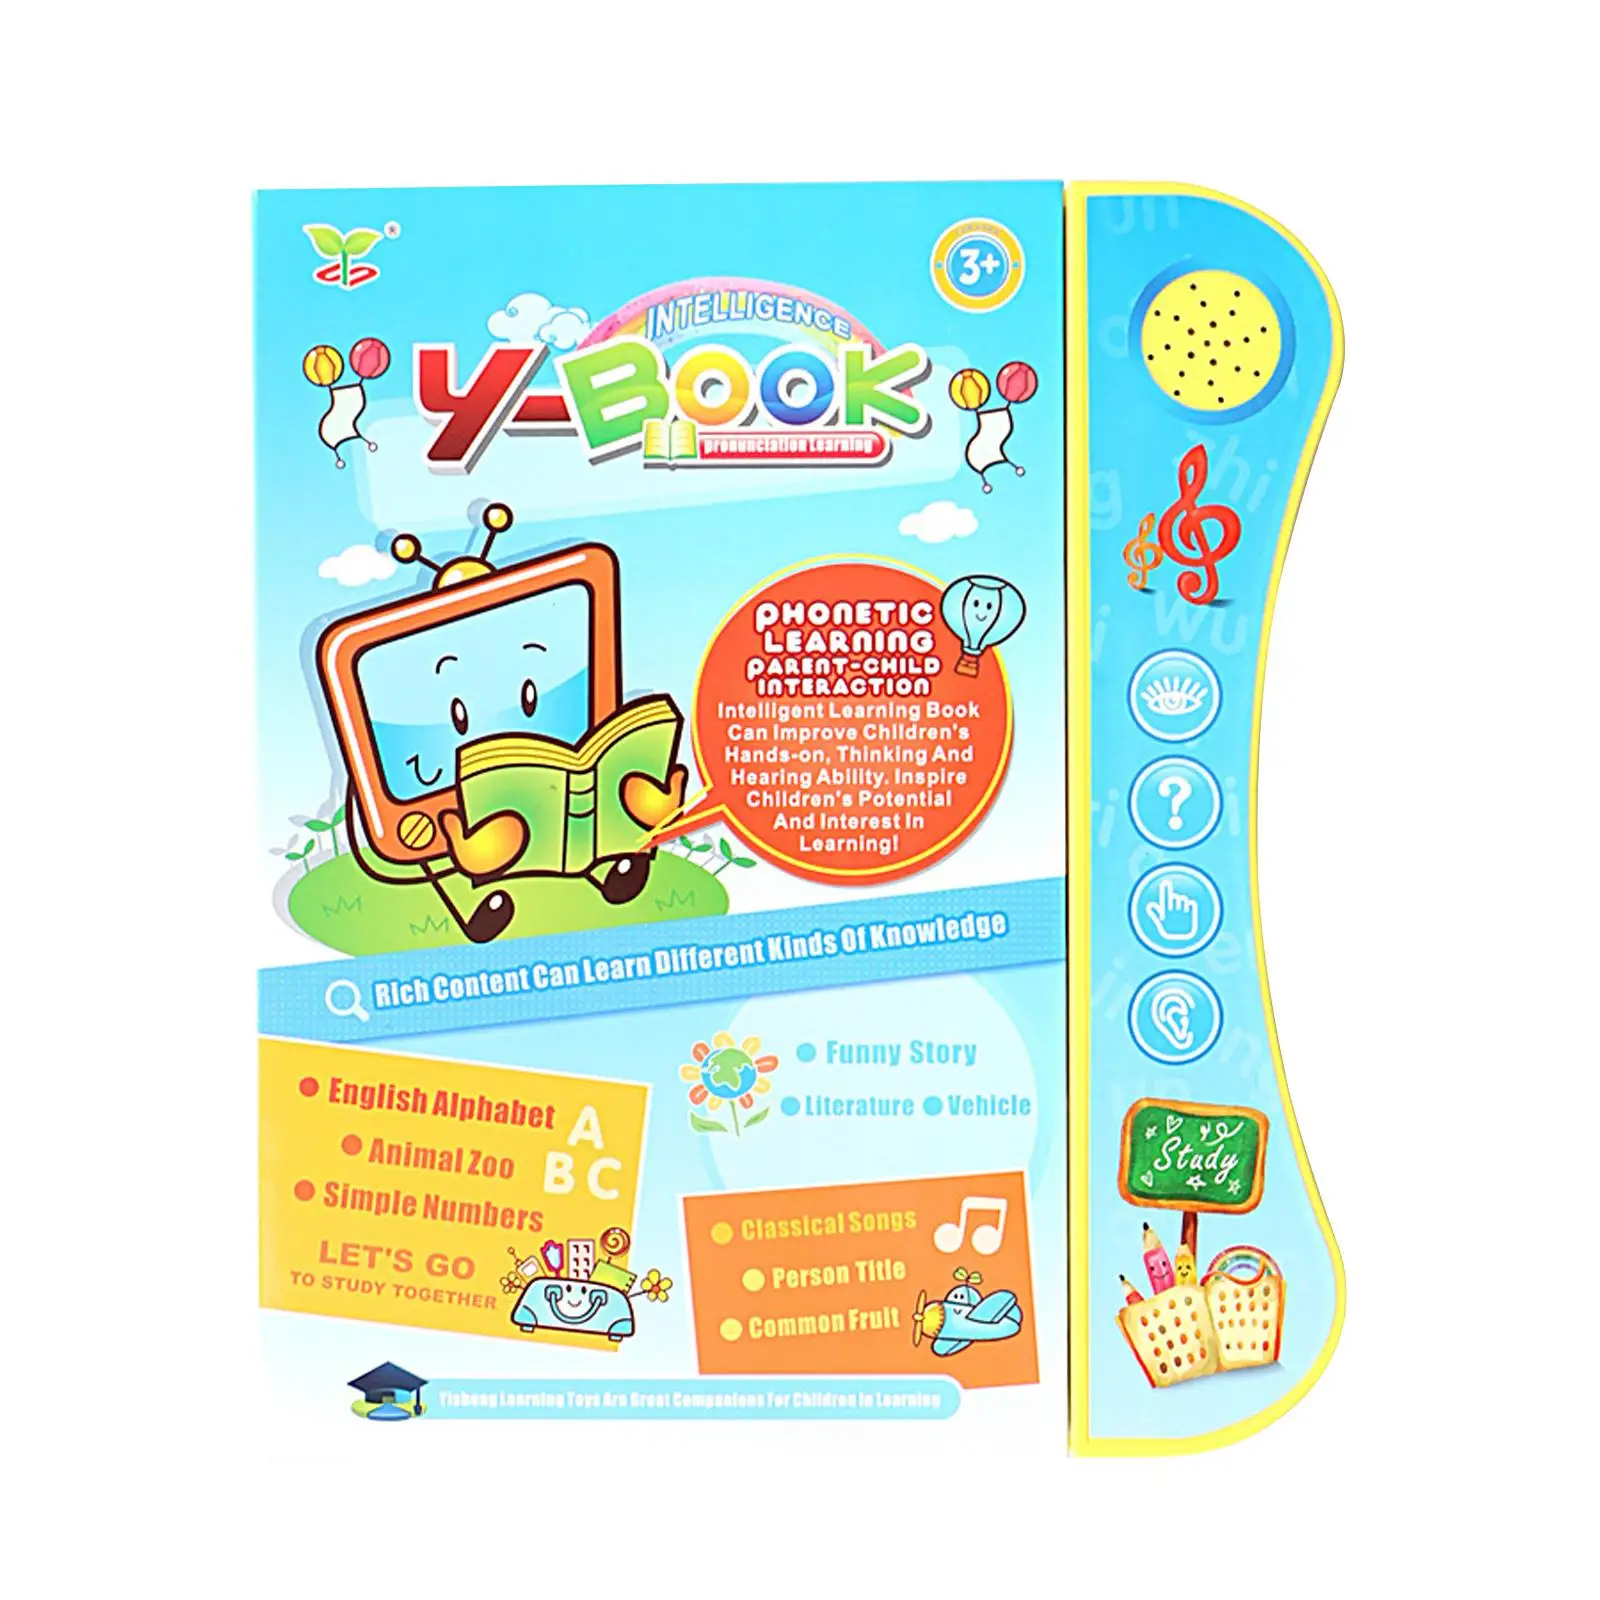 sound book for Baby Interactive Preschool Learn english for Character Appellation Language Transportation Animal Number